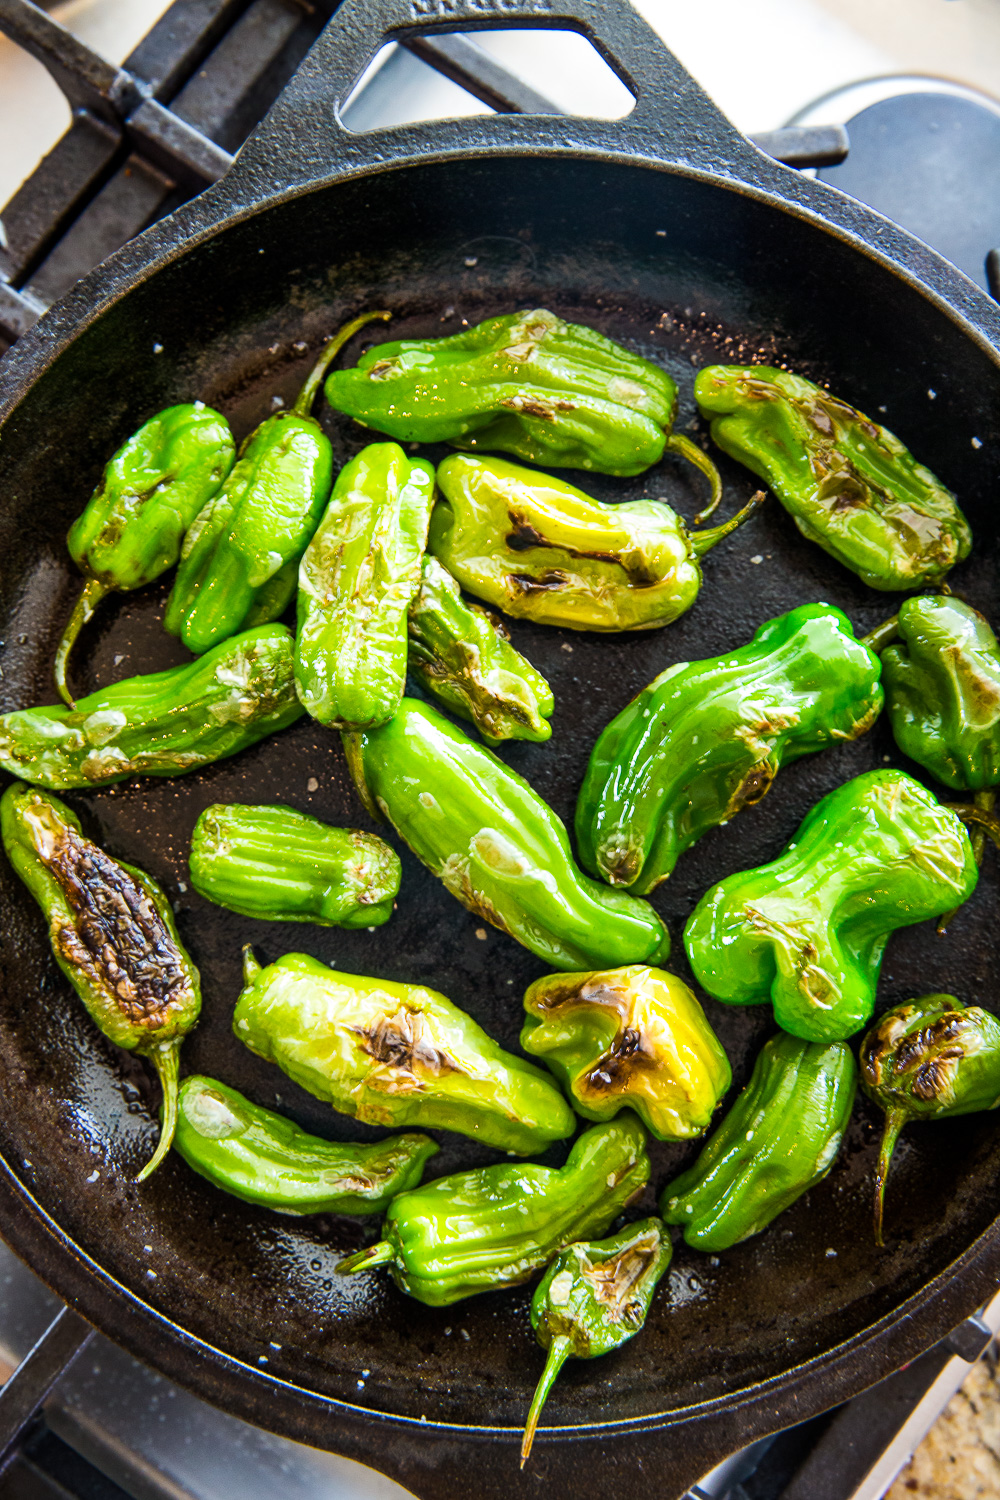 Blistered shishito peppers in a cast iron skillet